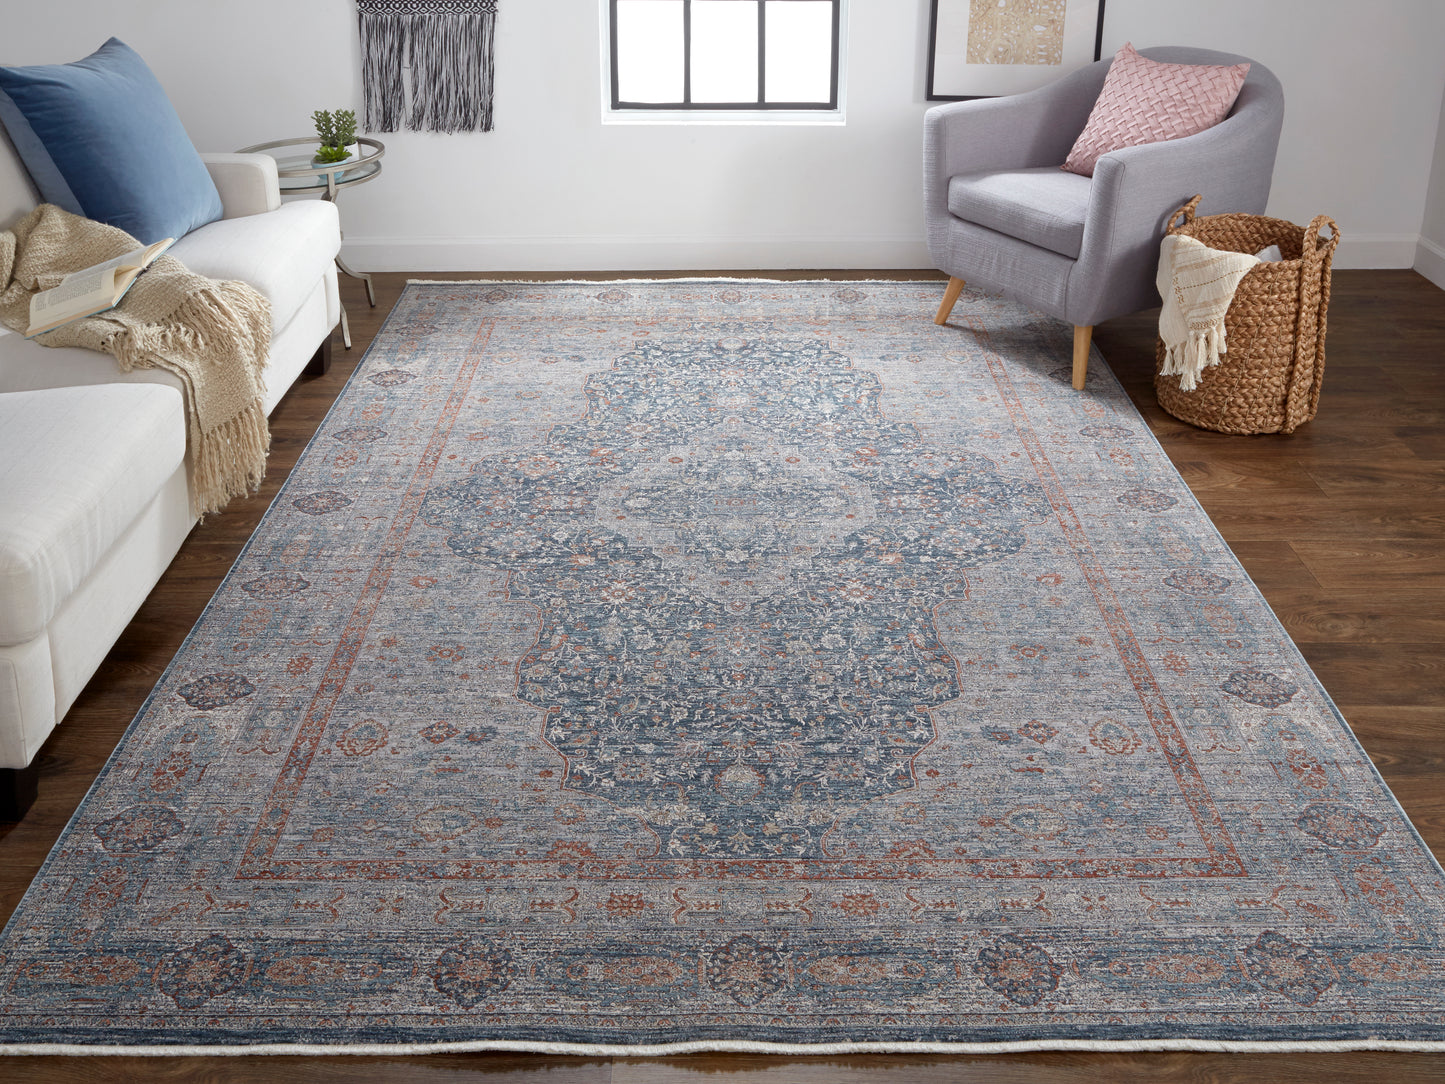 Marquette 3778F Machine Made Synthetic Blend Indoor Area Rug by Feizy Rugs